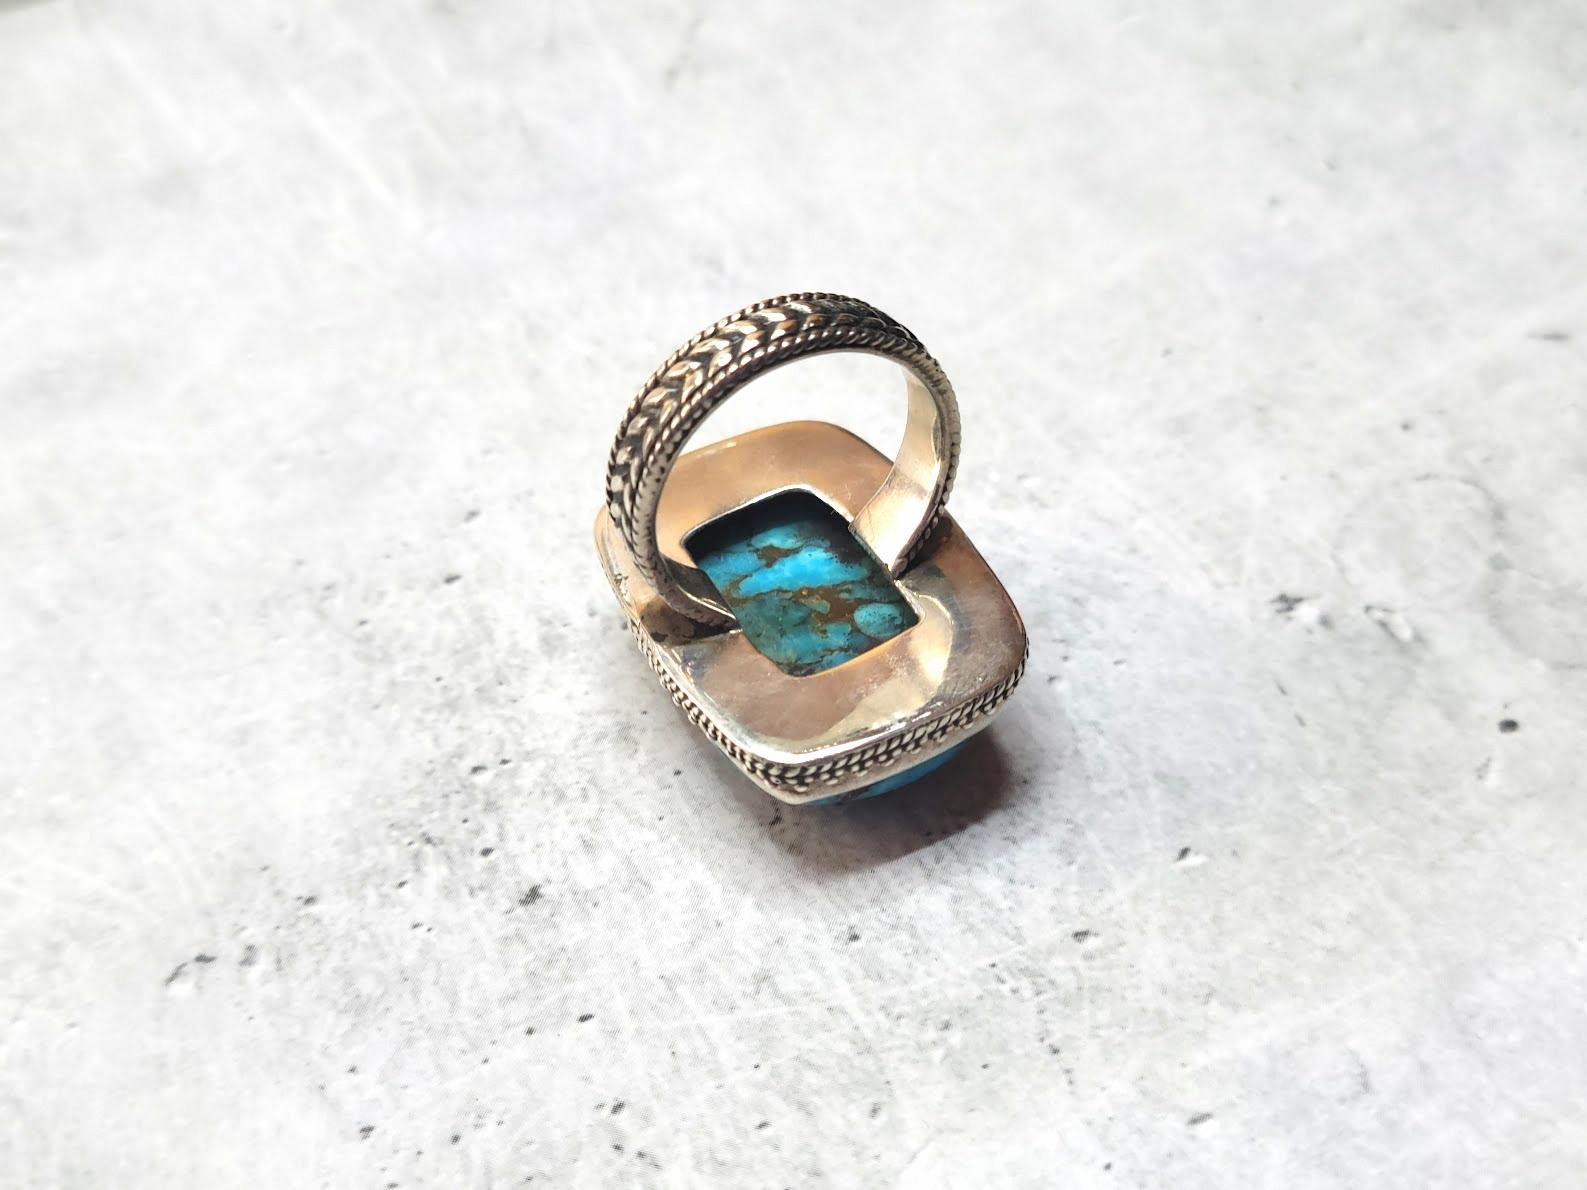 Arizona Morenci Turquoise Sterling Silver Ring In Excellent Condition For Sale In Chesterland, OH